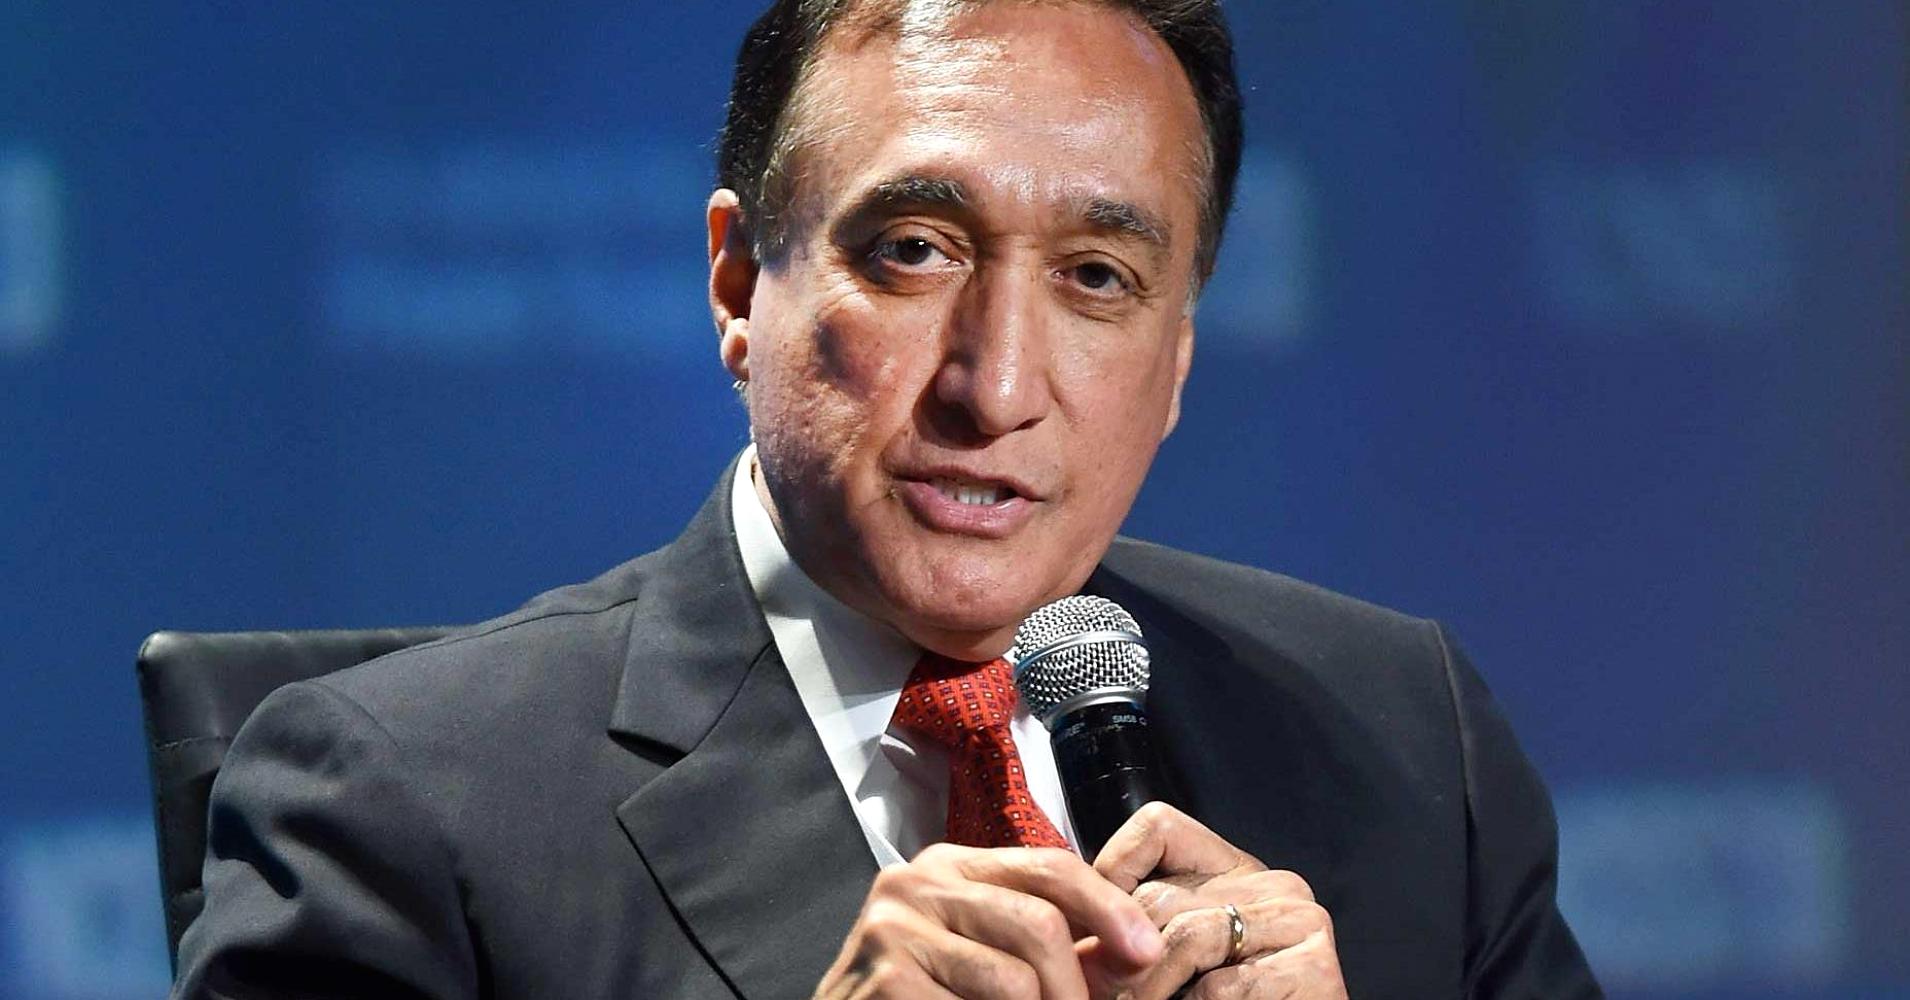 Former HUD Secretary Henry Cisneros says new tax code threatens the 'fragility' of the US system